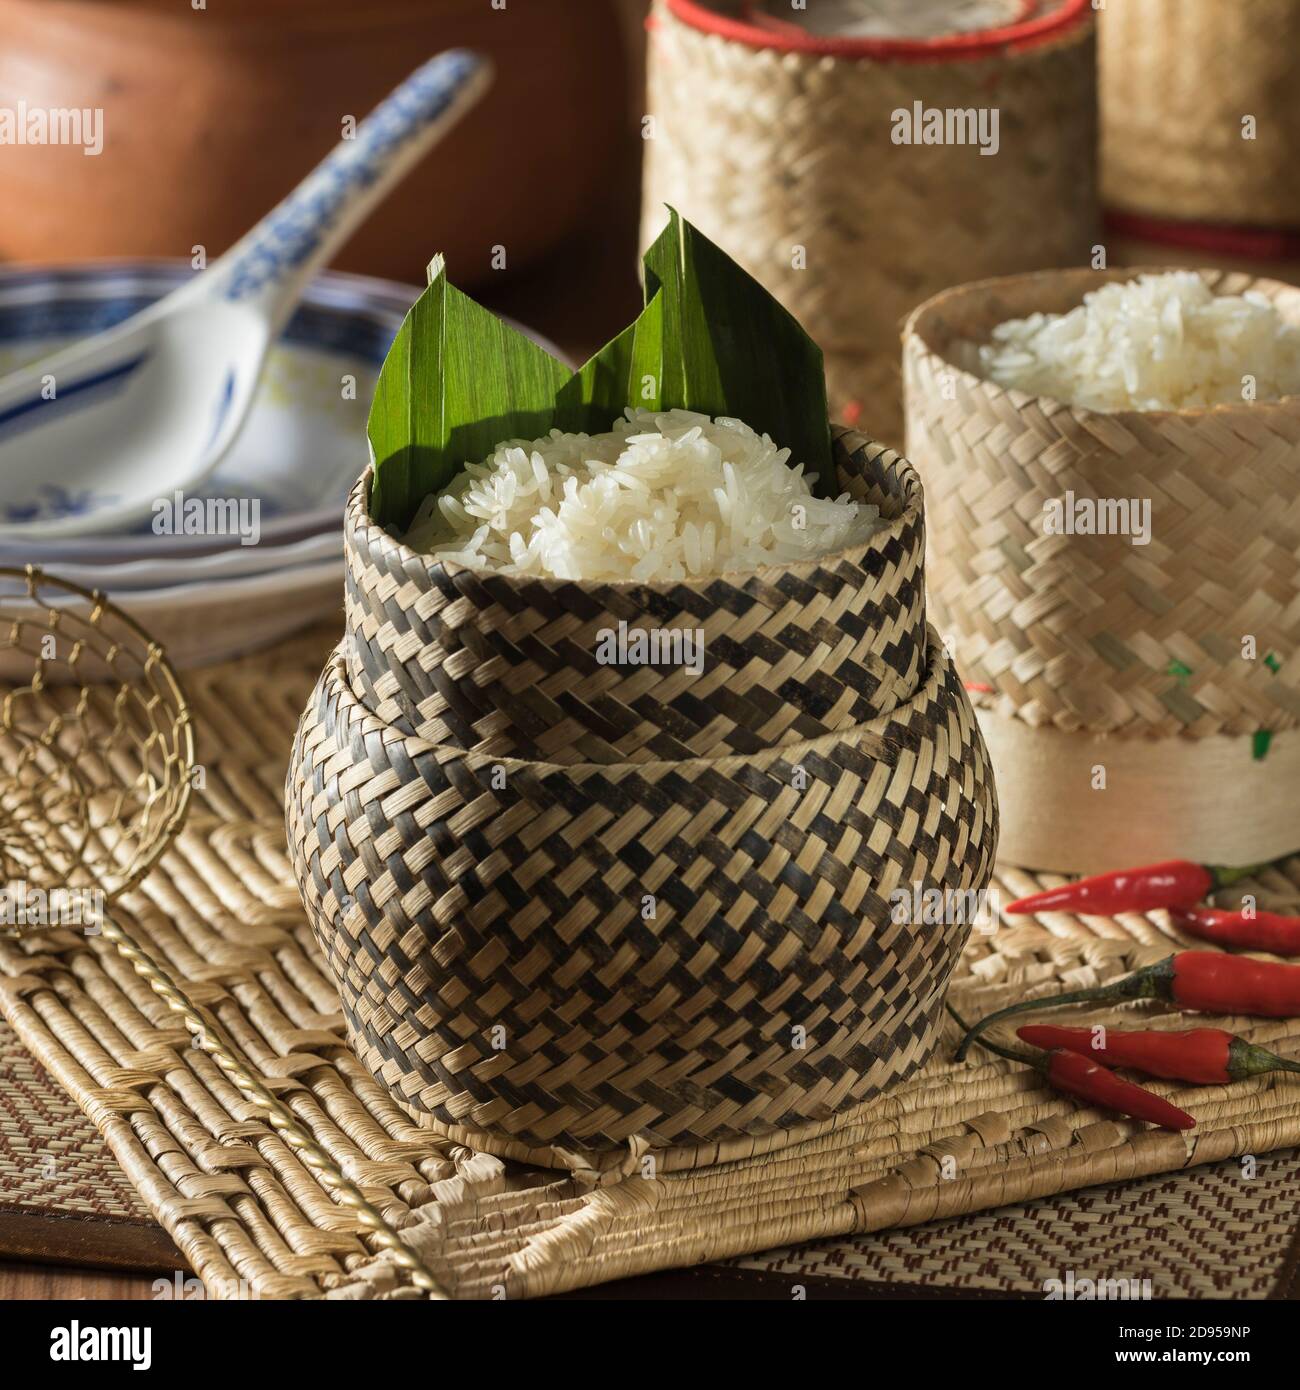 Sticky rice. Laos, Thailand South East Asia Food Stock Photo